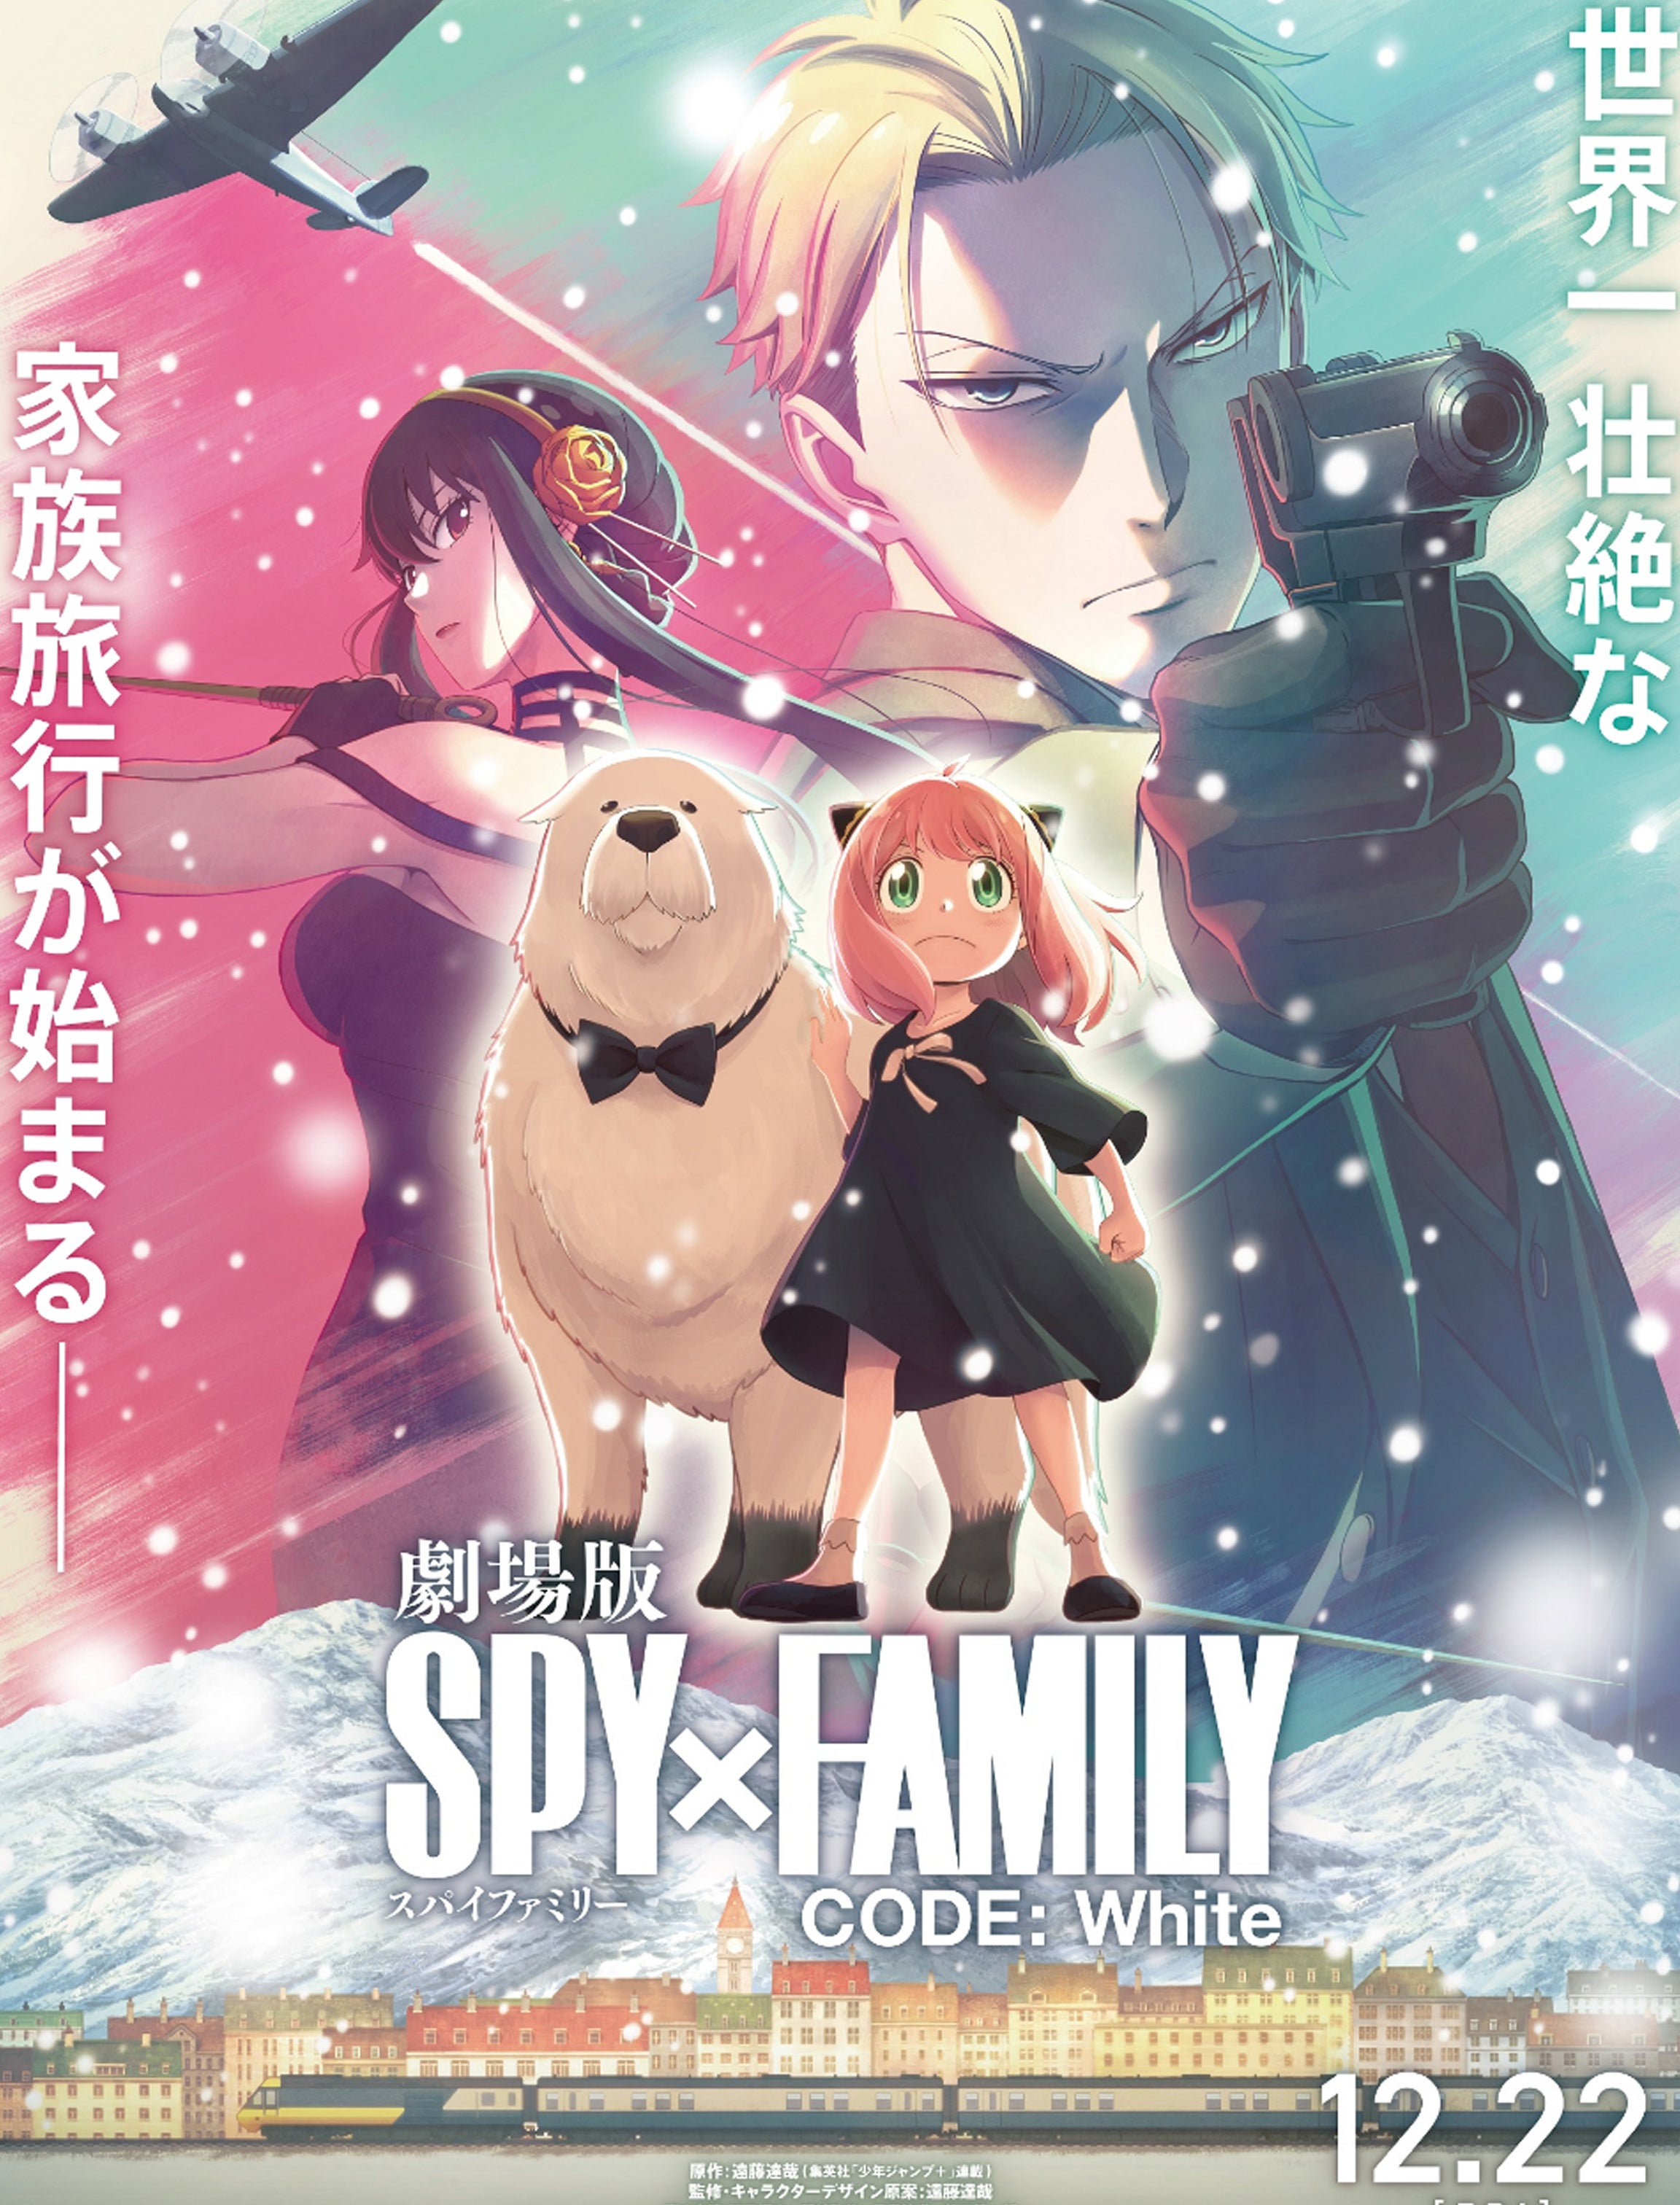 Spy x Family is Getting an Anime Adpation  GamerBraves